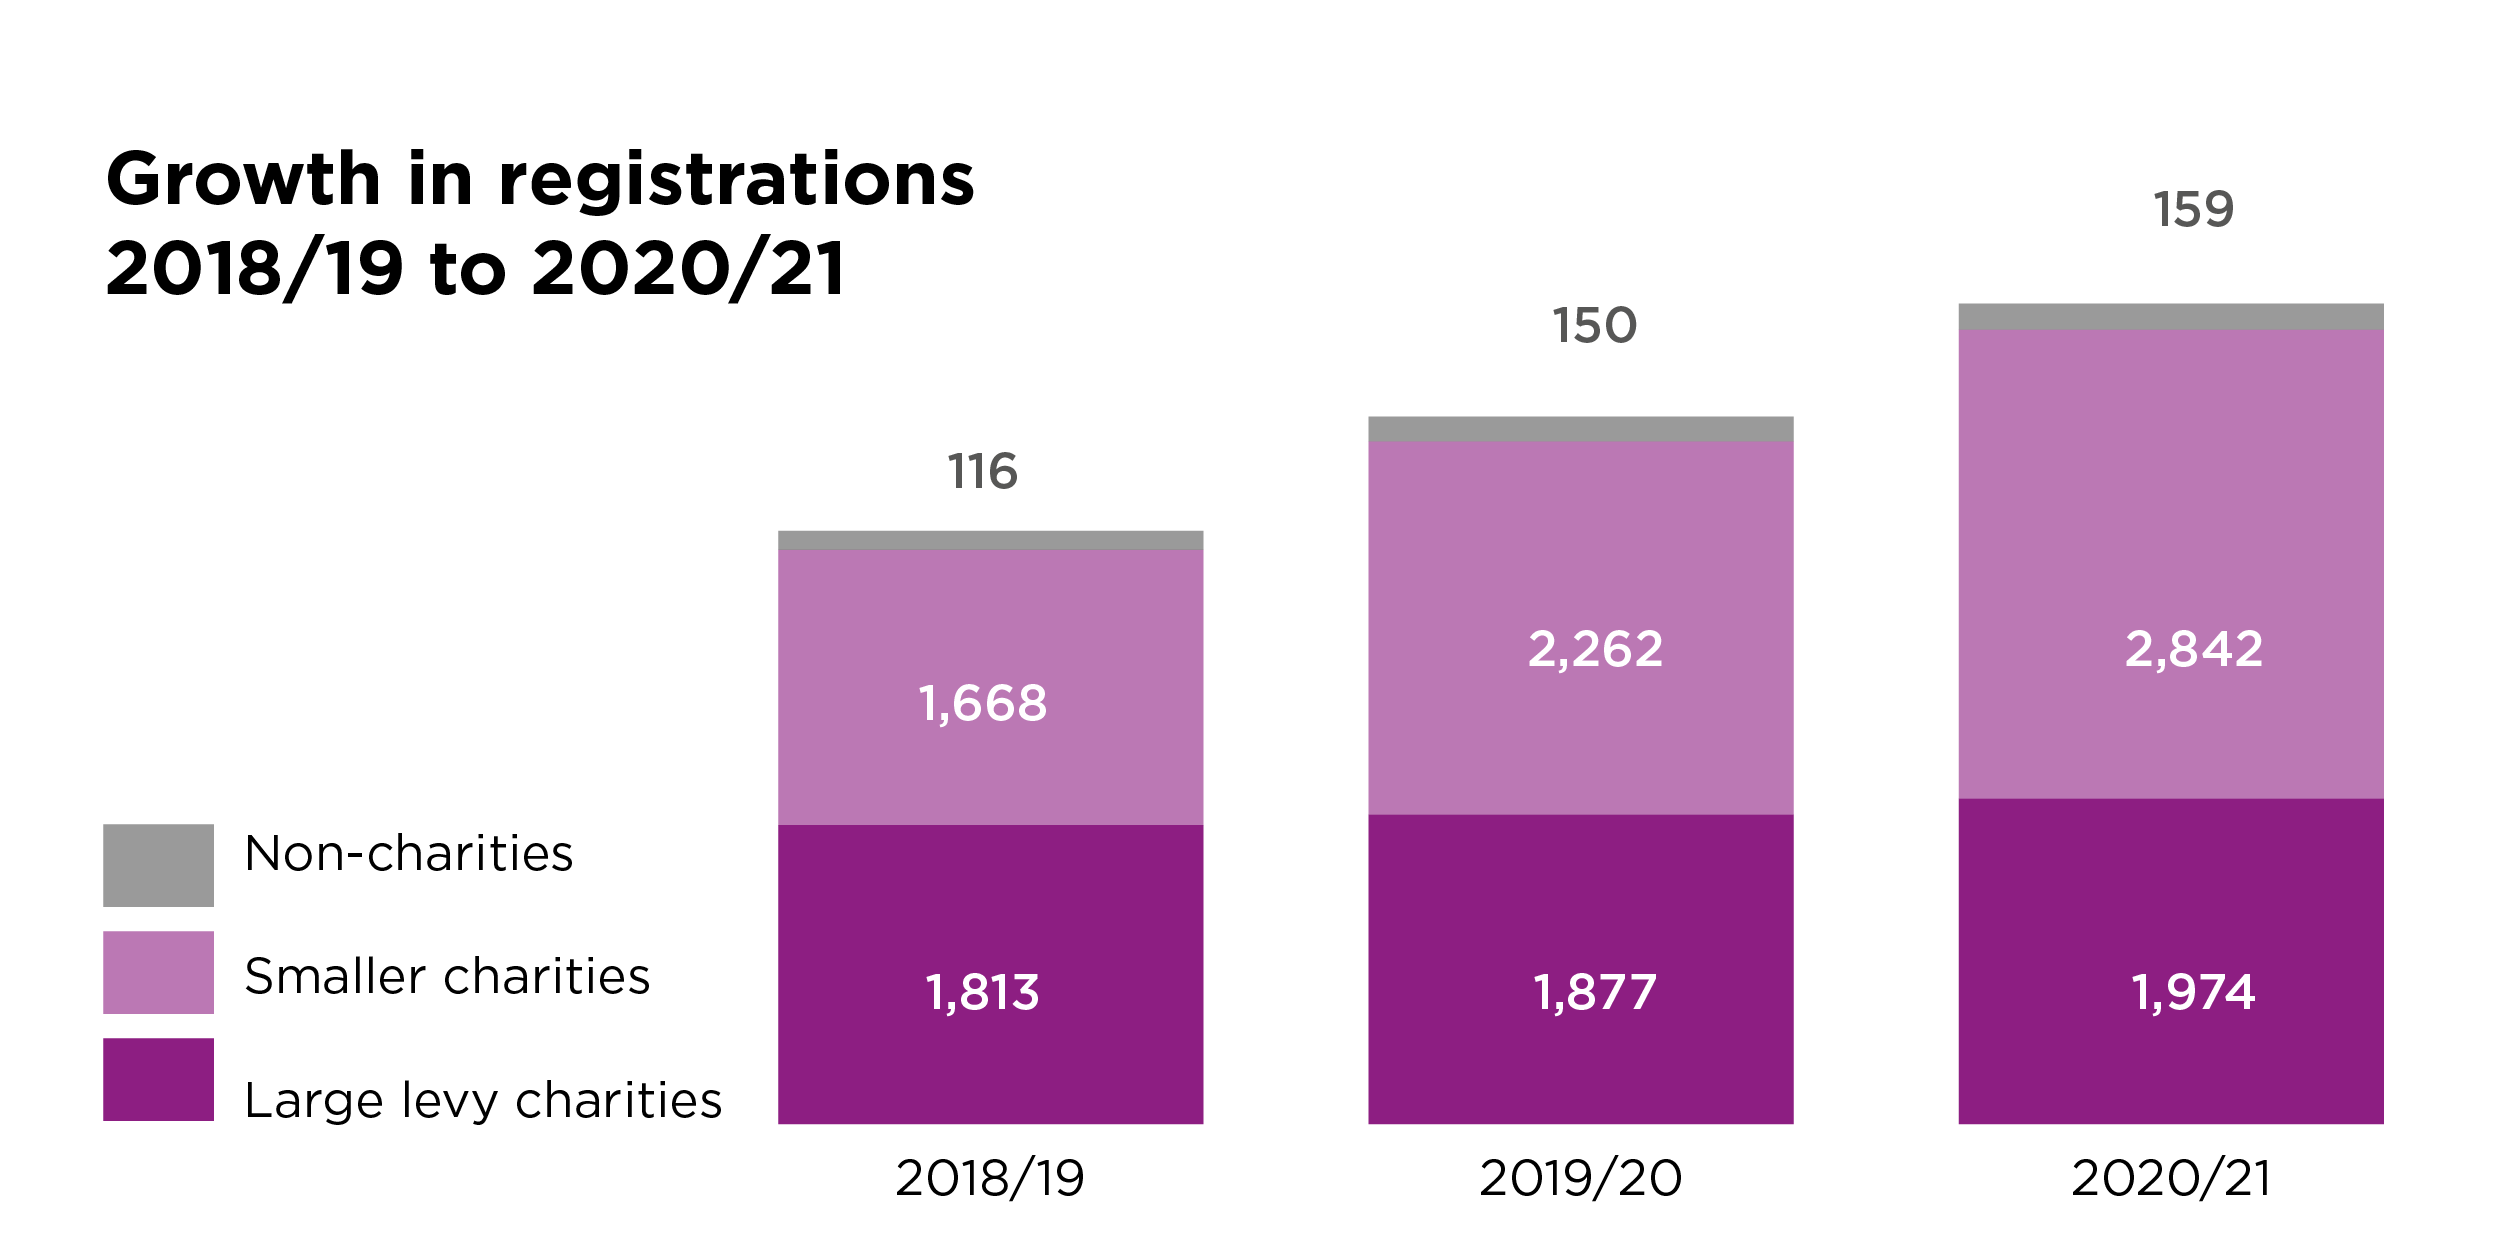 Graphic showing growth in registrations 2018/19 to 2020/21